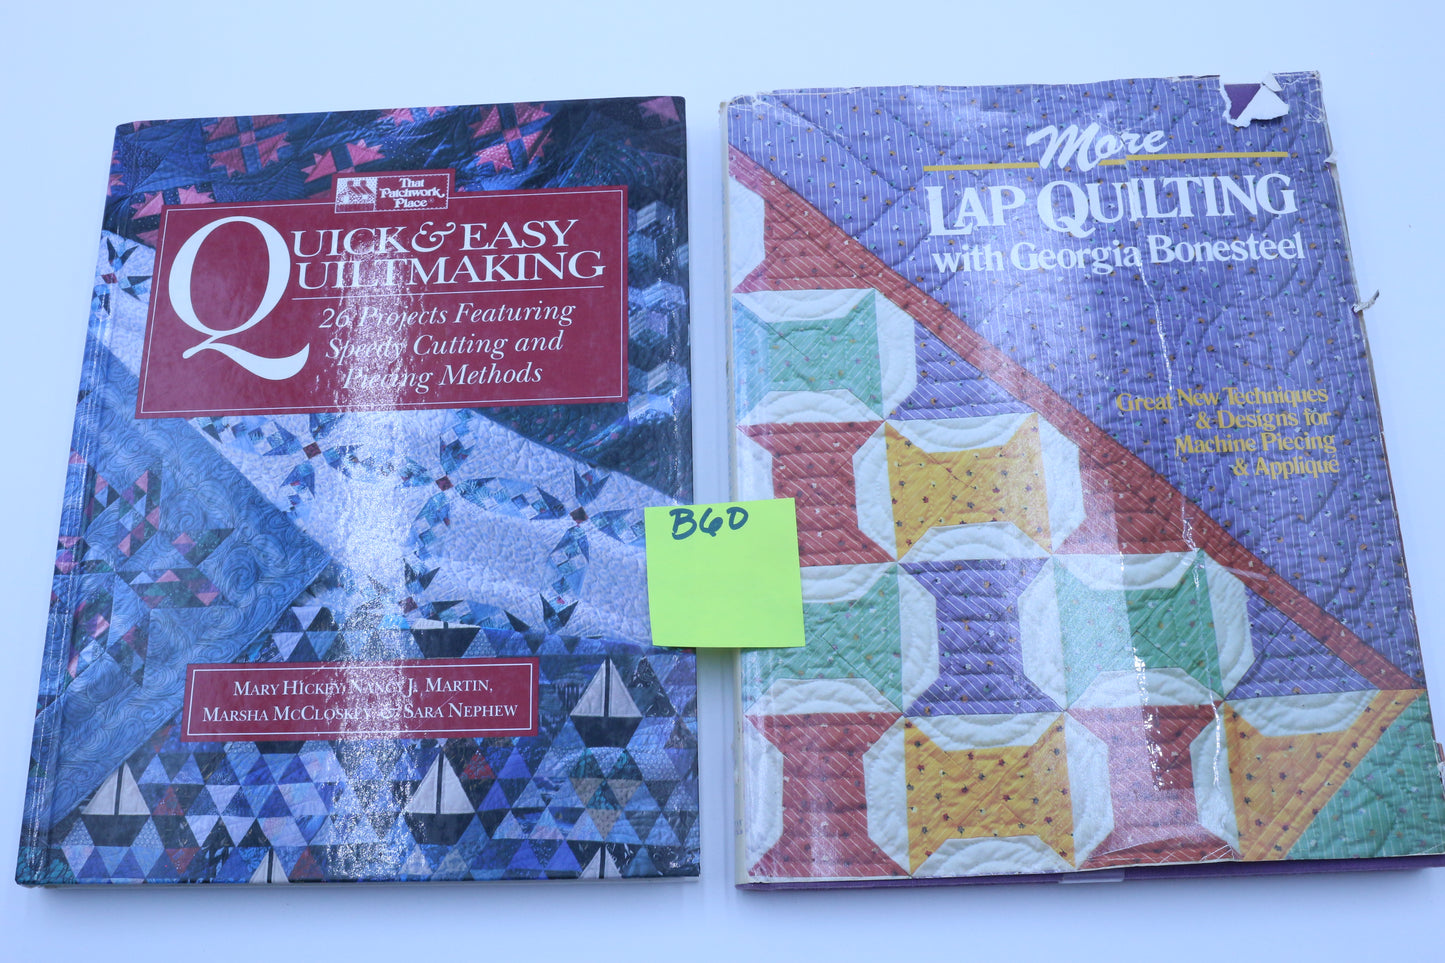 Quick & Easy Quilt Making or More Lap Quilting